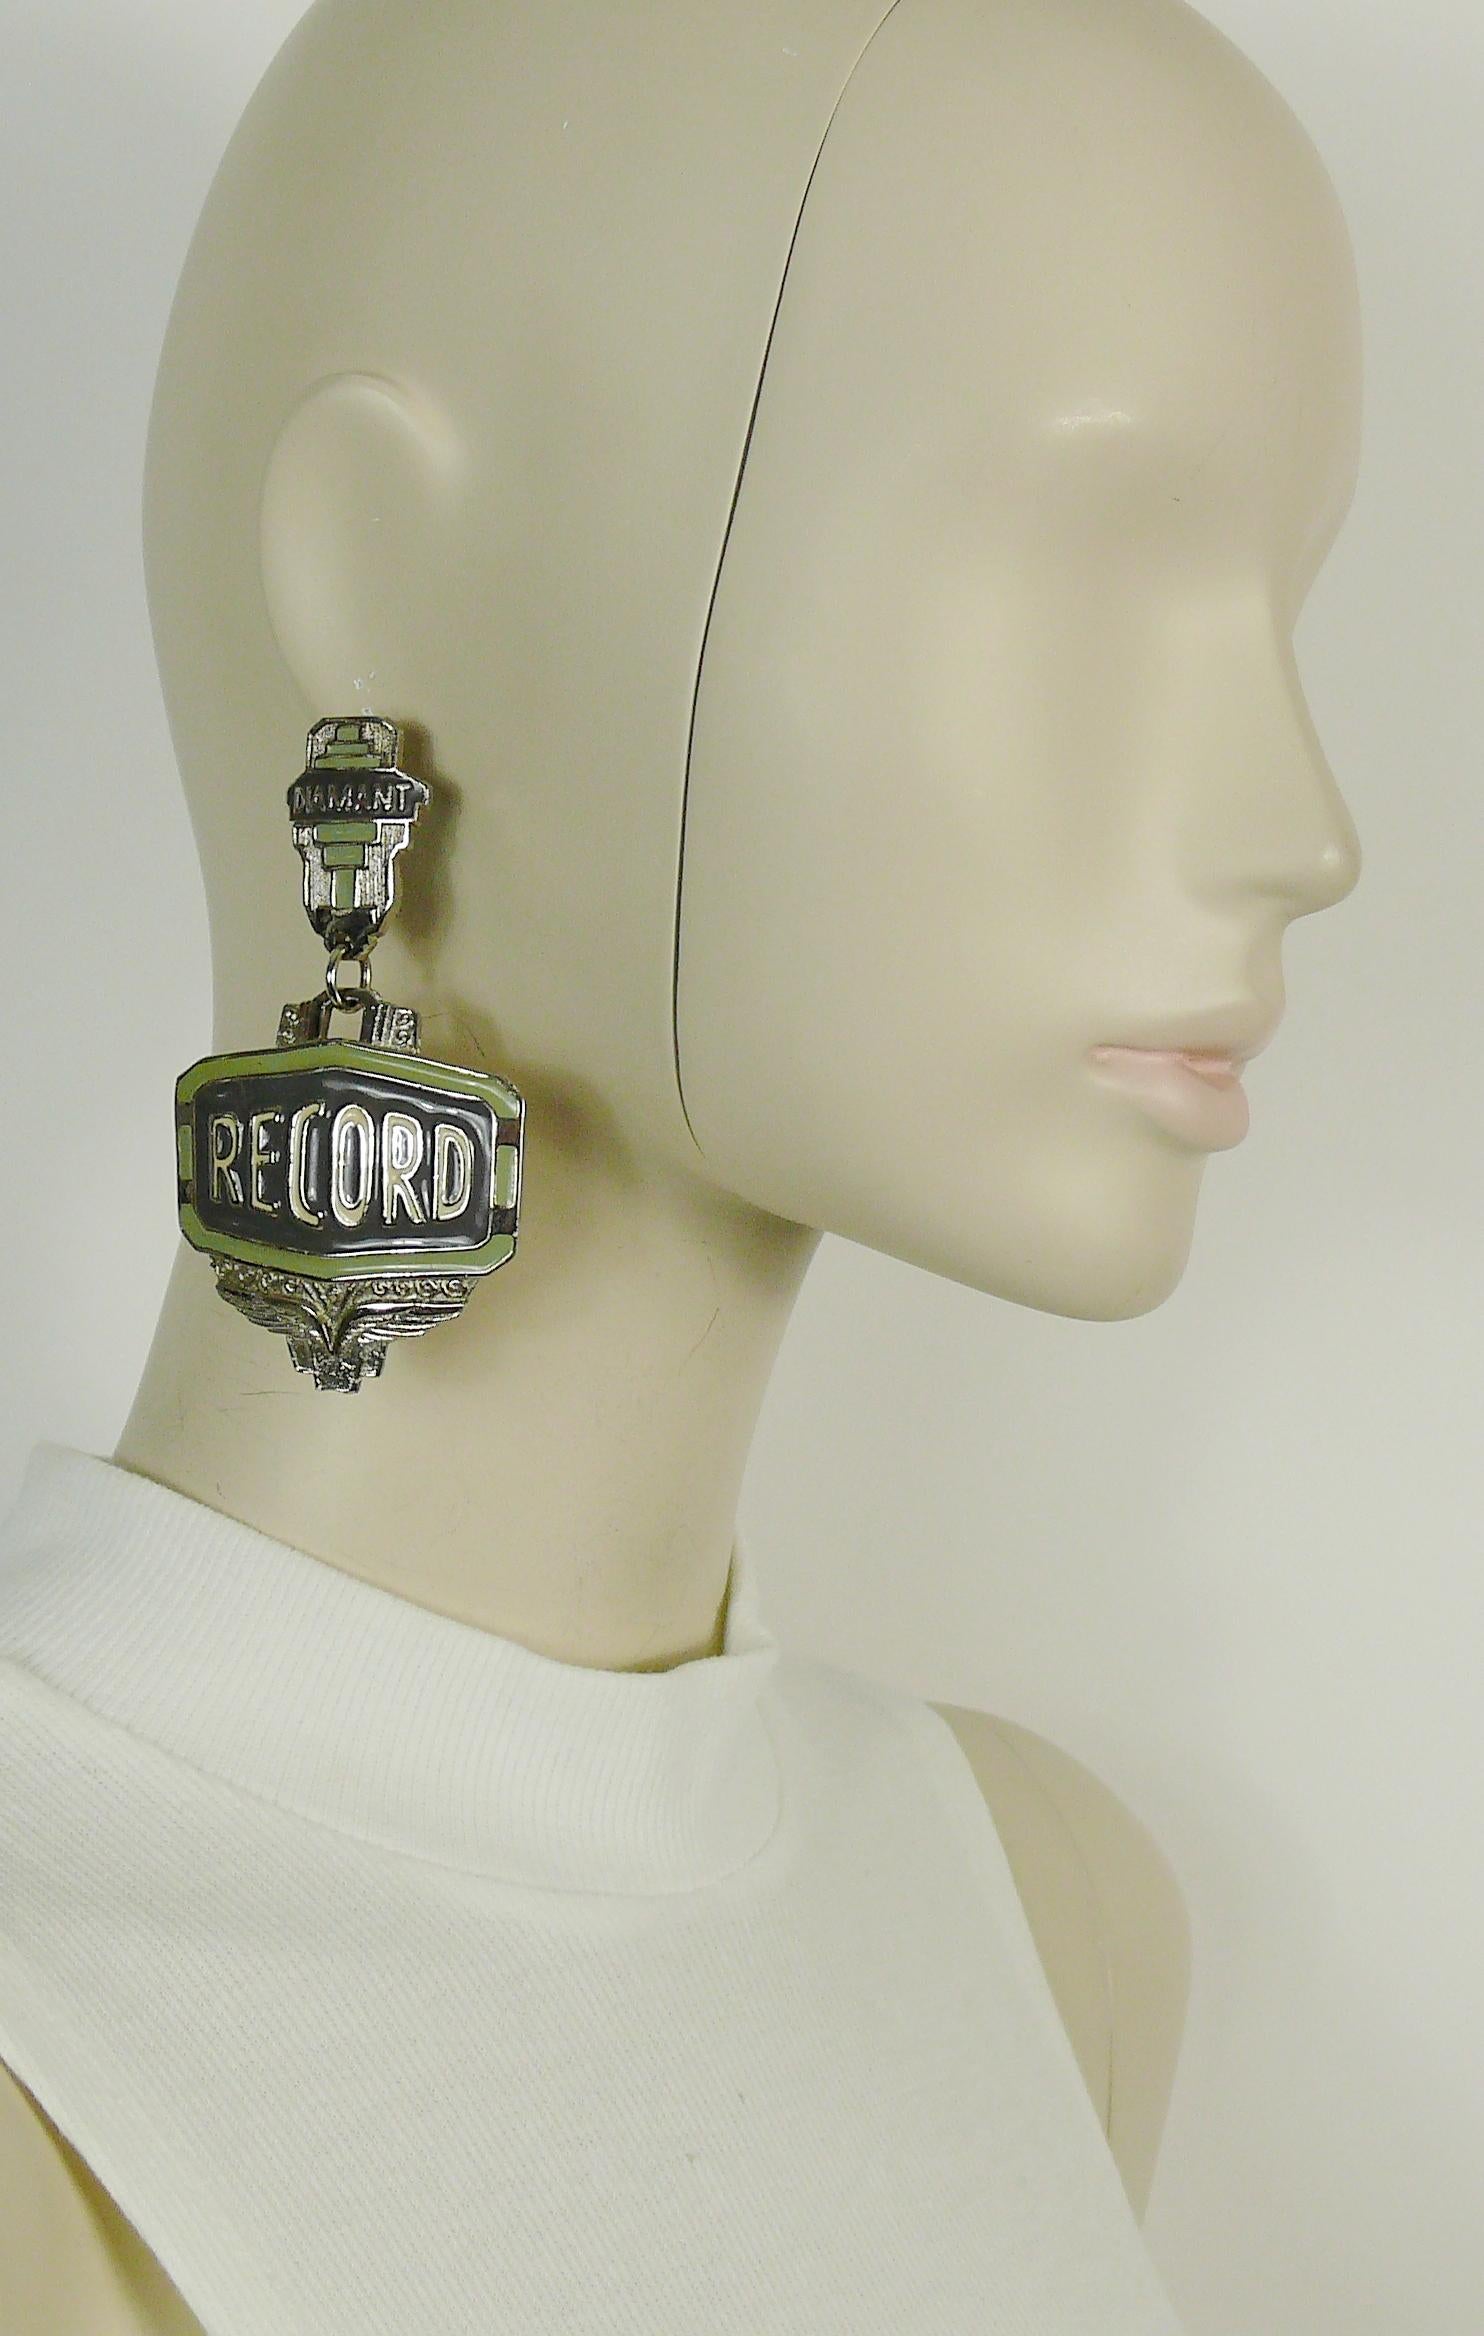 JEAN PAUL GAULTIER vintage massive silver toned metal dangling earrings (clip on) featuring an Art Deco inspired design with green/grey/off white overlay and DIAMANT-RECORD inscriptions.

Marked JPG.

Indicative measurements : length approx. 9.3 cm